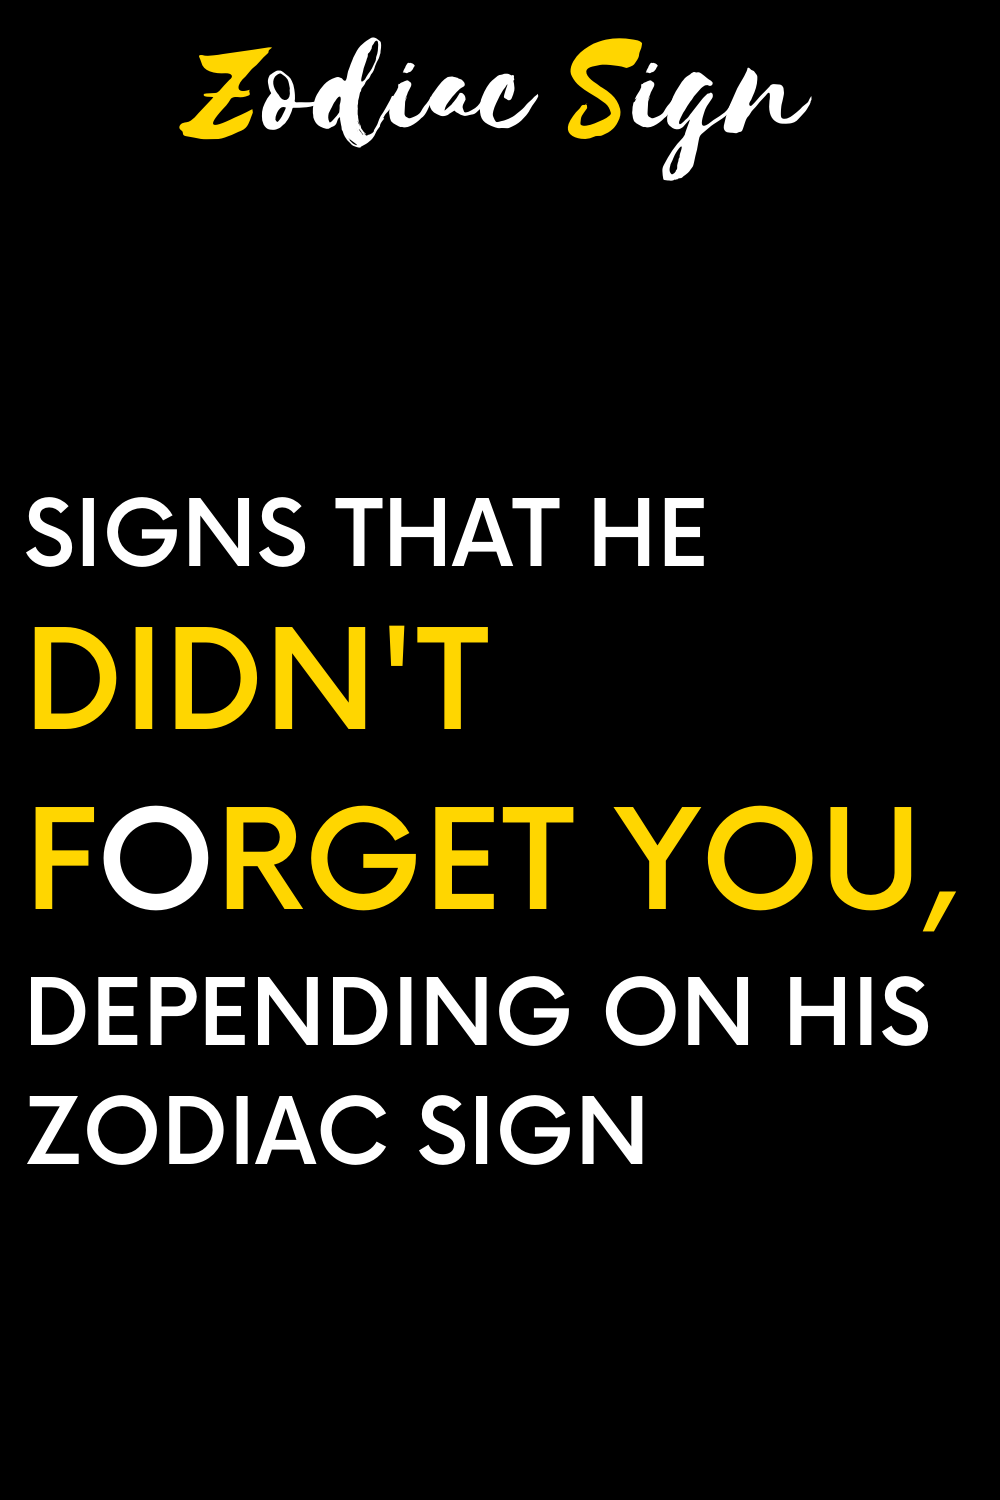 Signs that he didn't forget you, depending on his zodiac sign